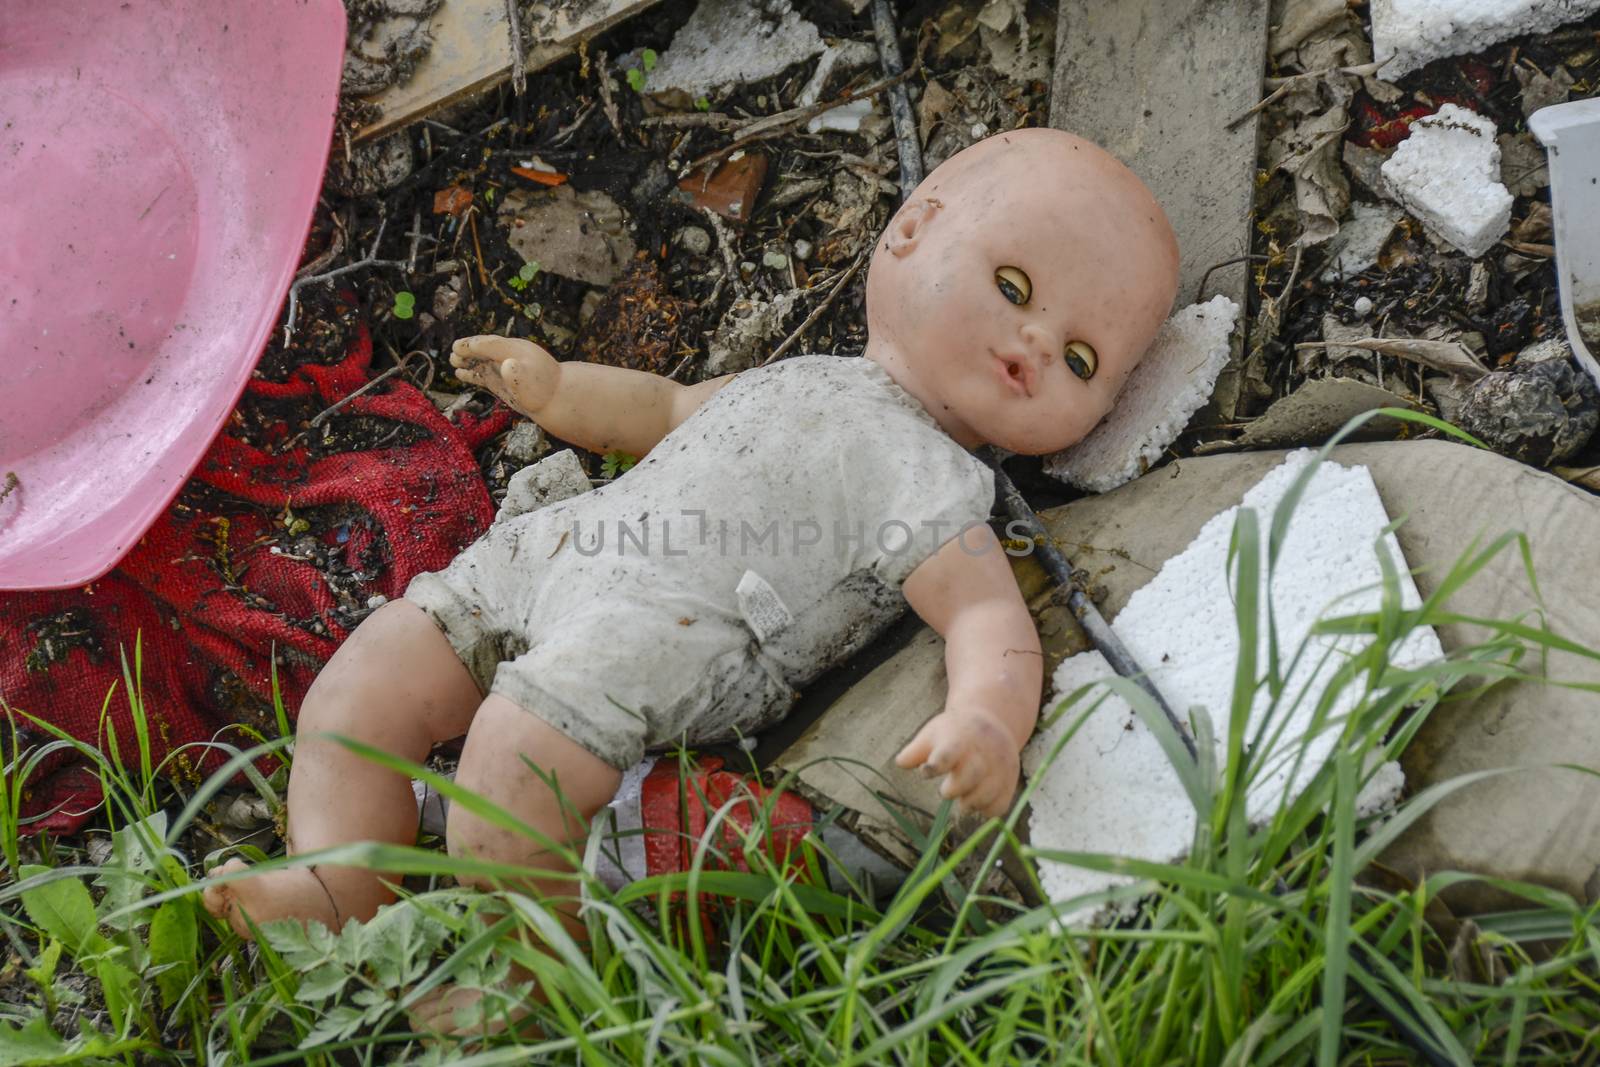 doll lies abandoned on a garbage dump by itsajoop